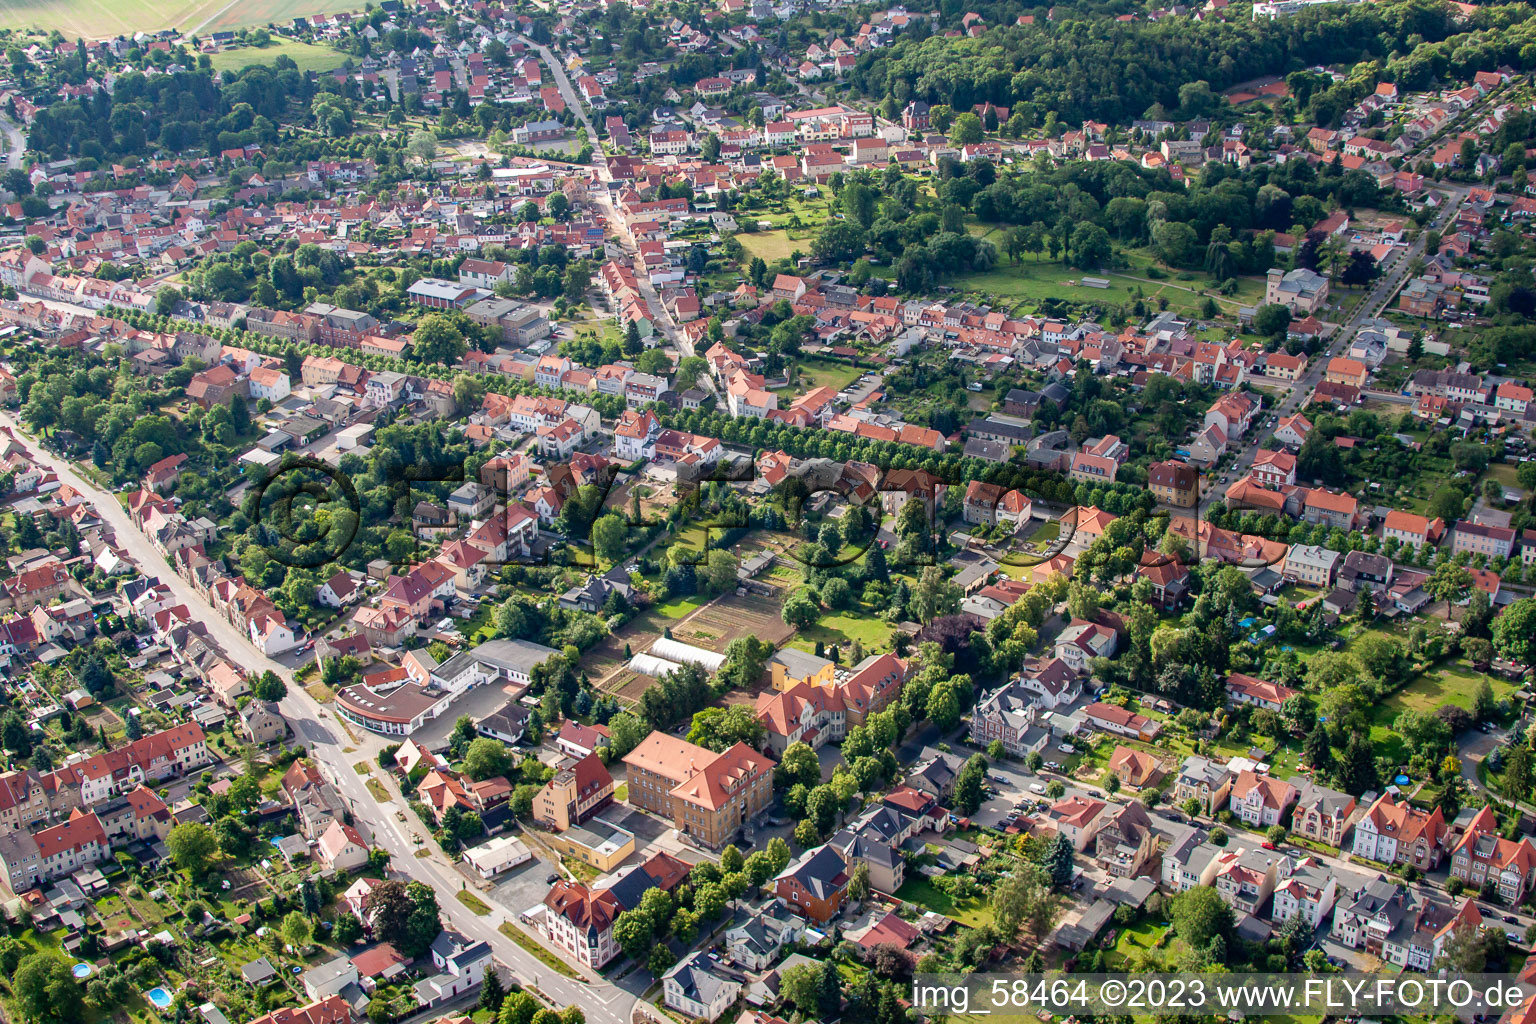 Aerial view of Between B185 and Allee in Ballenstedt in the state Saxony-Anhalt, Germany